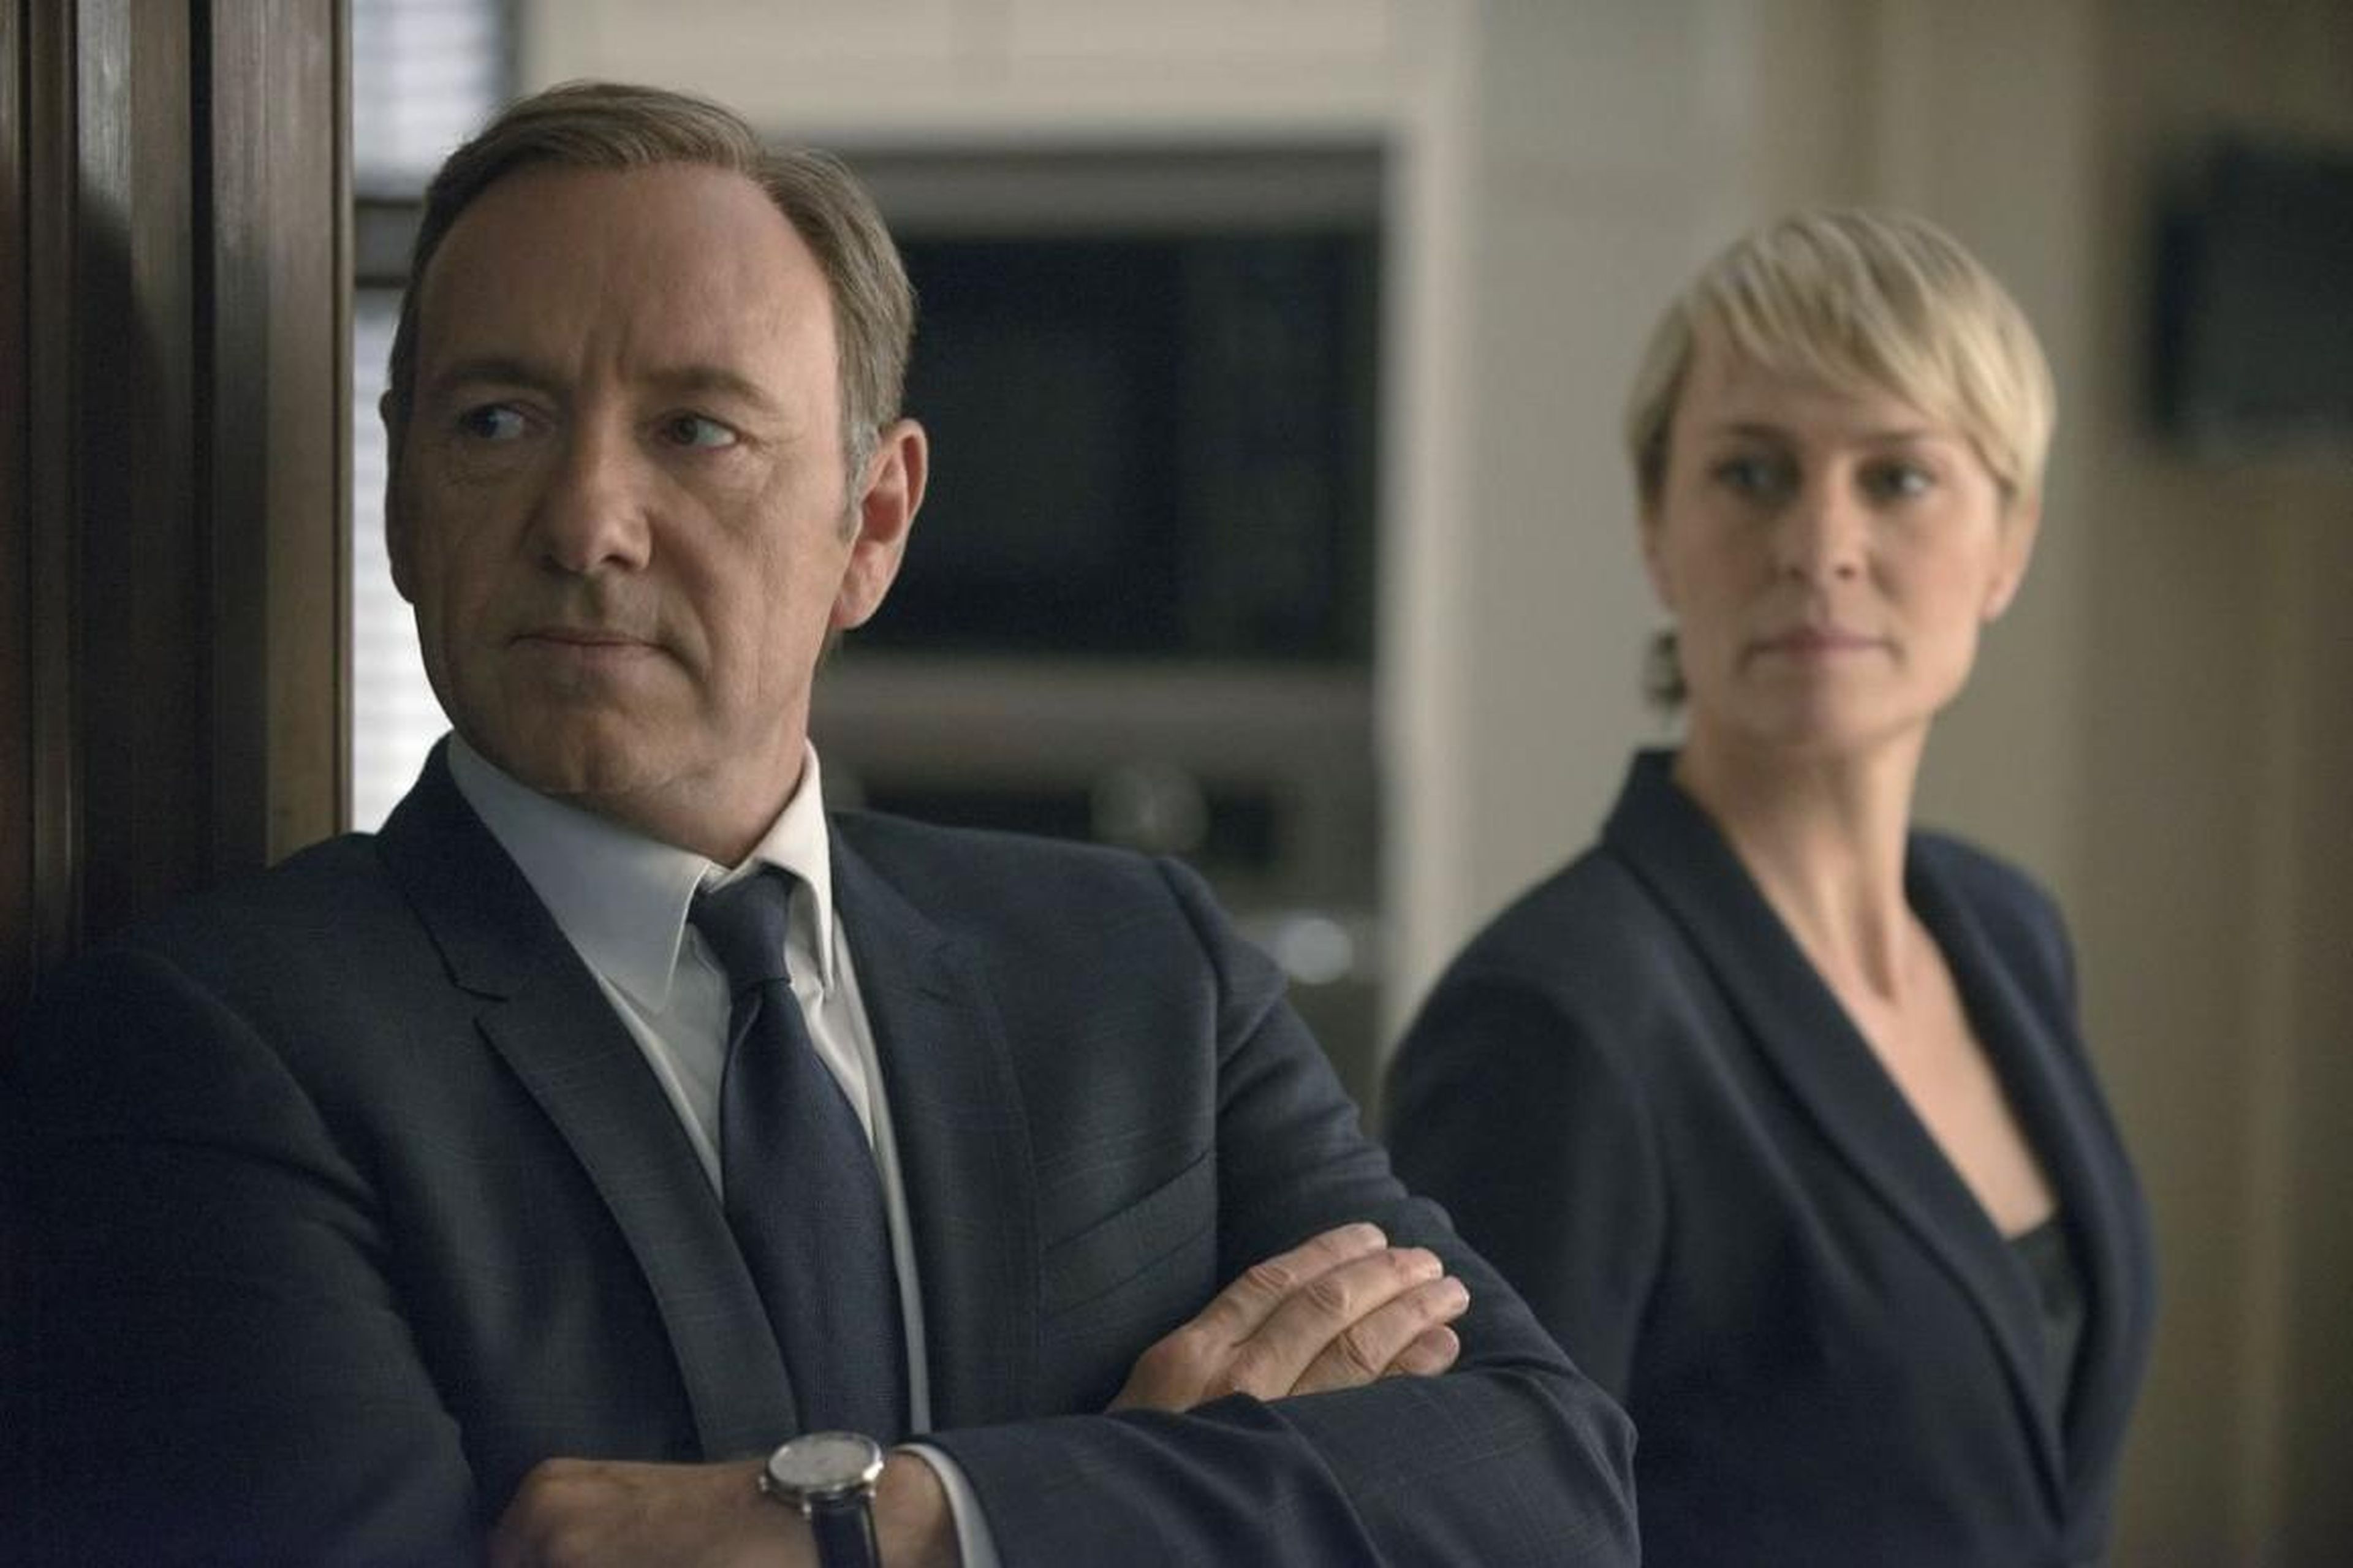 55. "House of Cards" — 78%